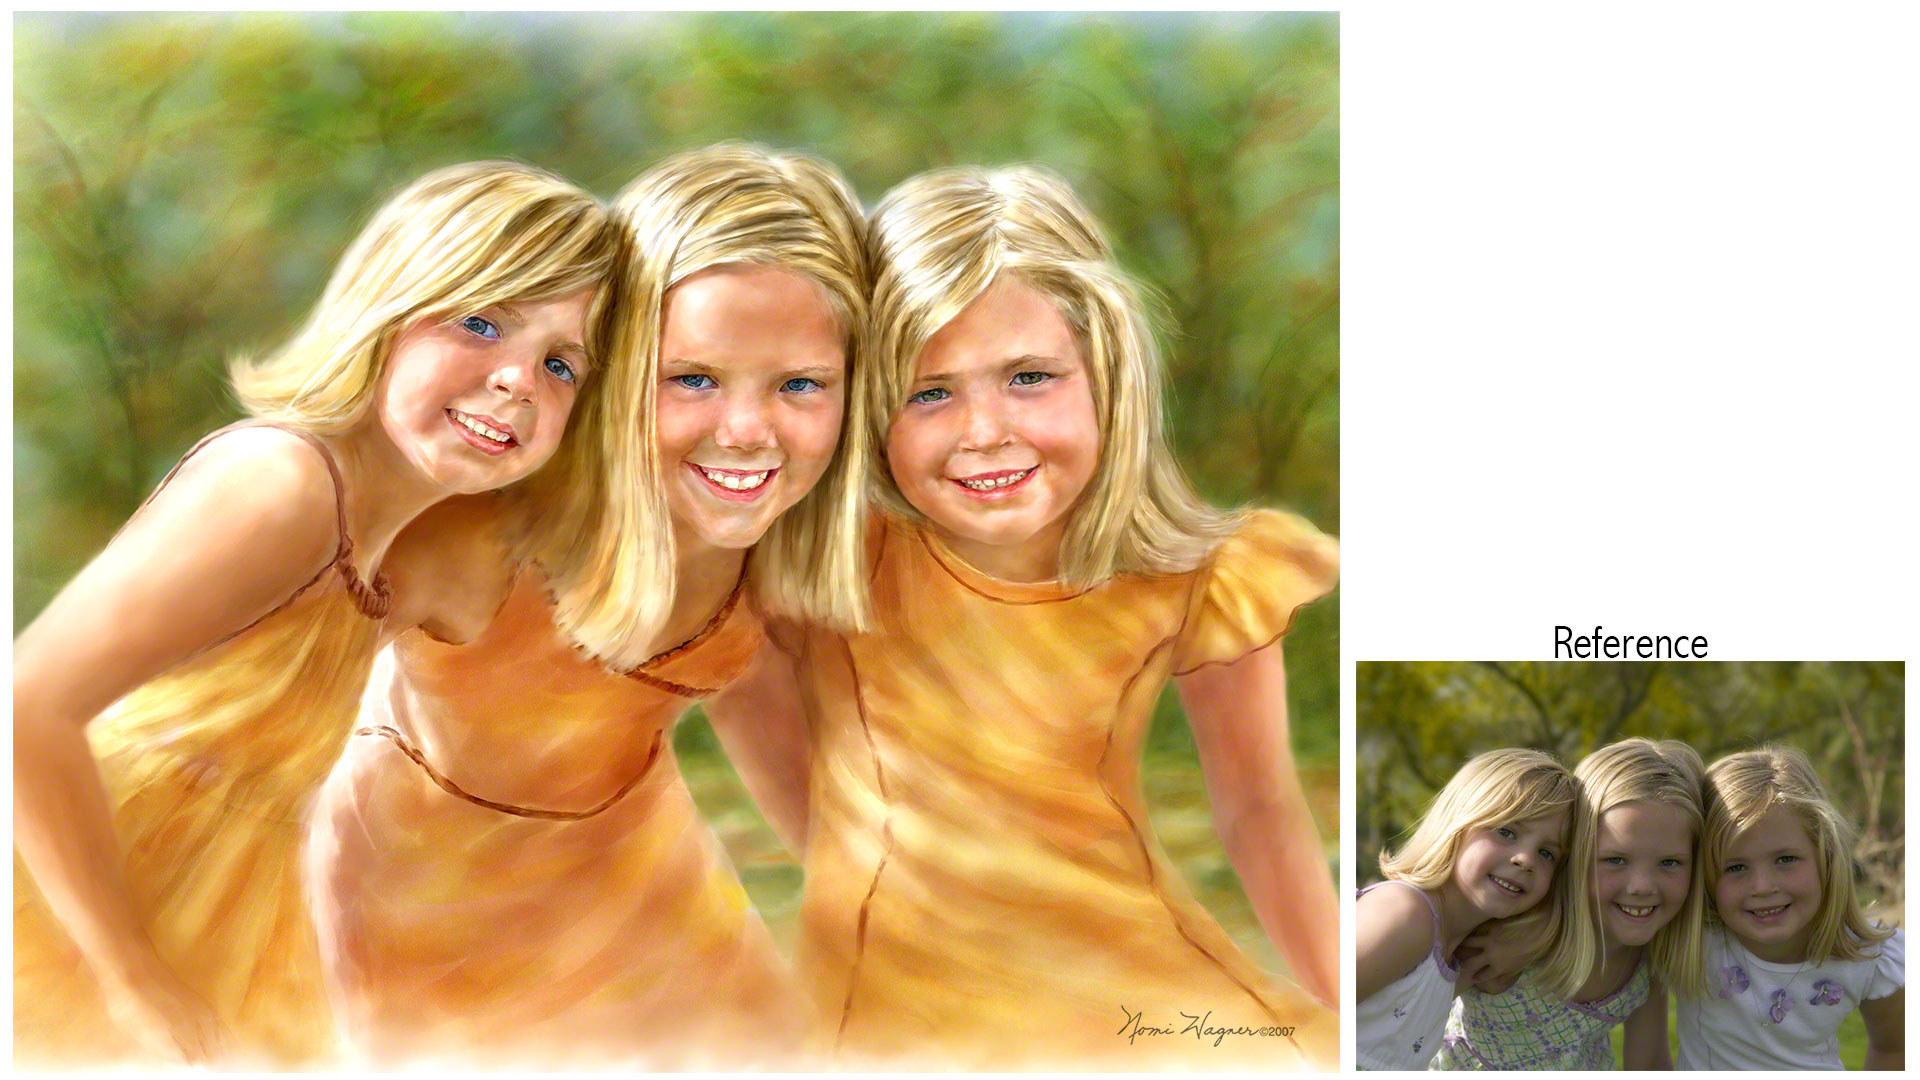 Three young blond sisters in yellow dresses lean in as they smile in a custom portrait painting from a photo.